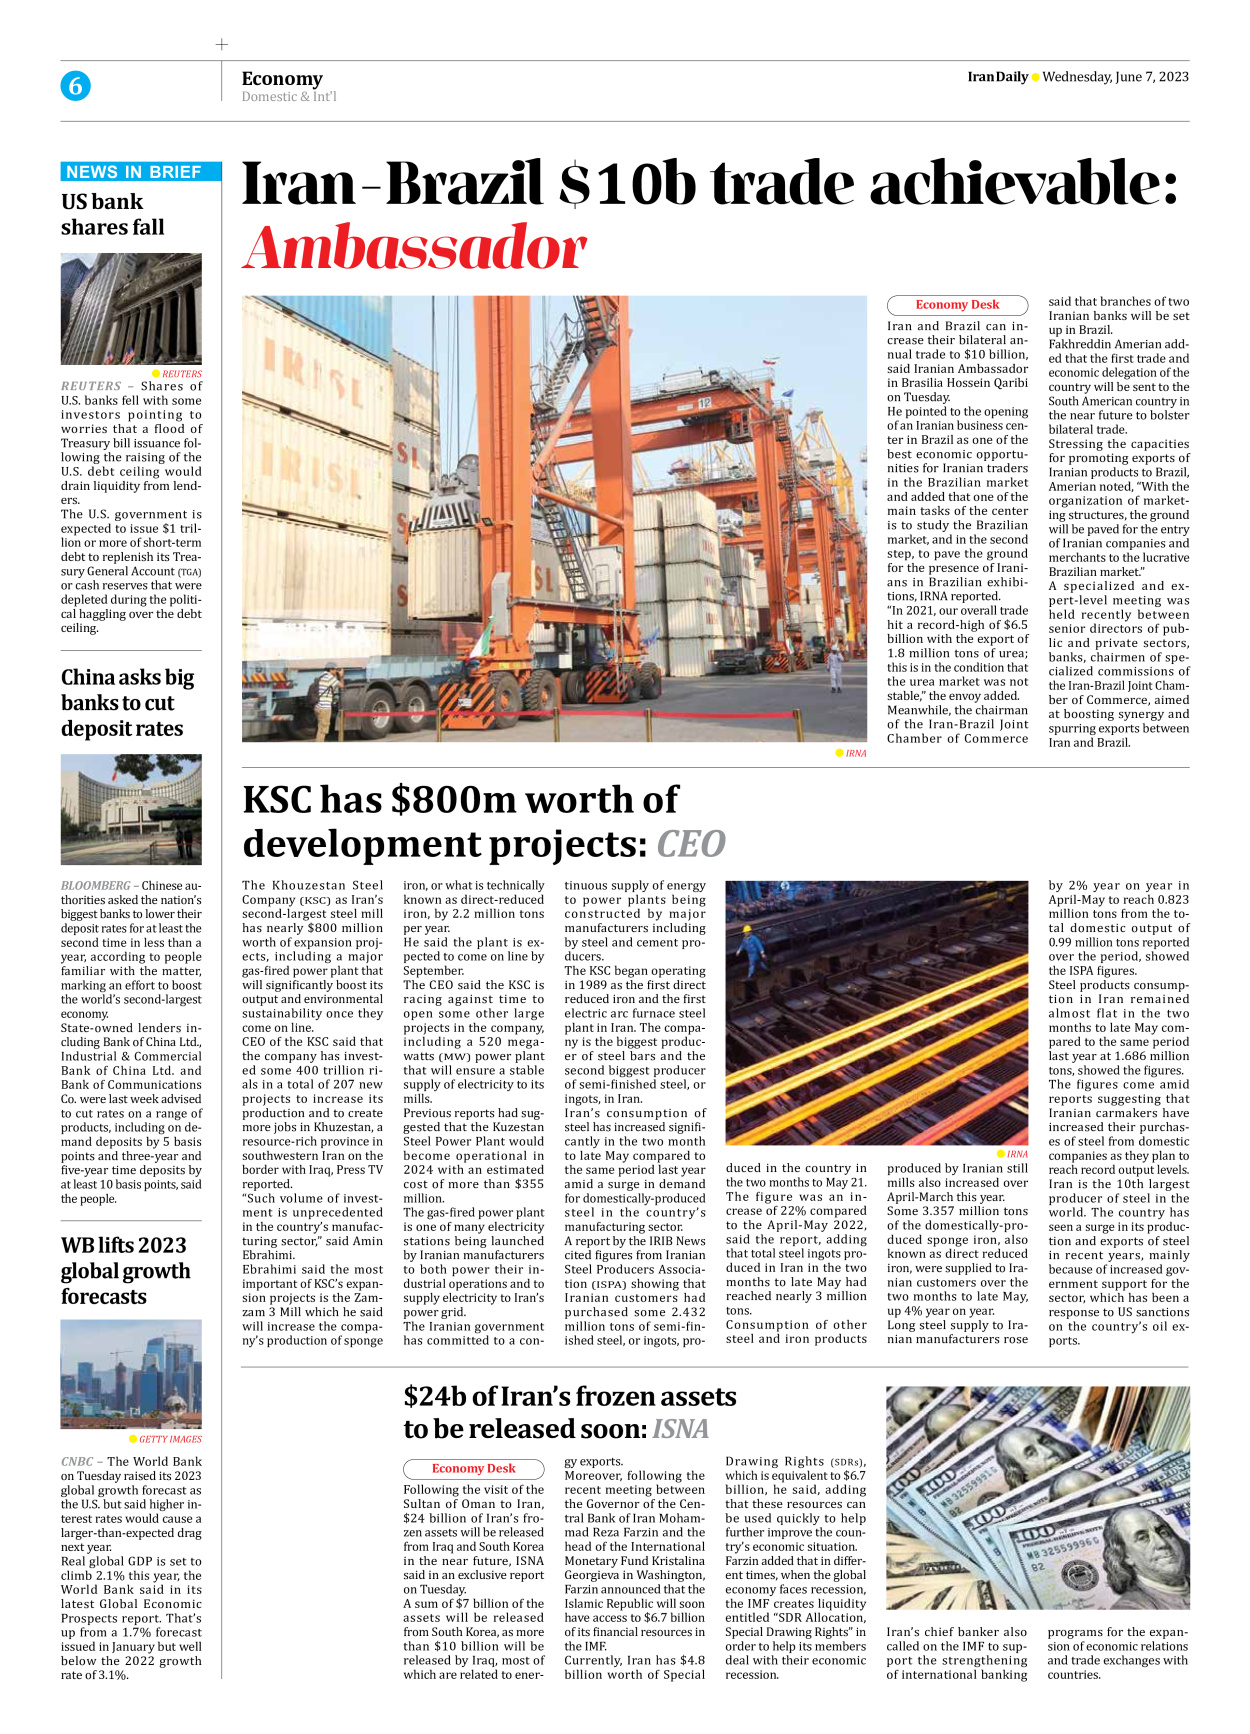 Iran Daily - Number Seven Thousand Three Hundred and Eight - 07 June 2023 - Page 6